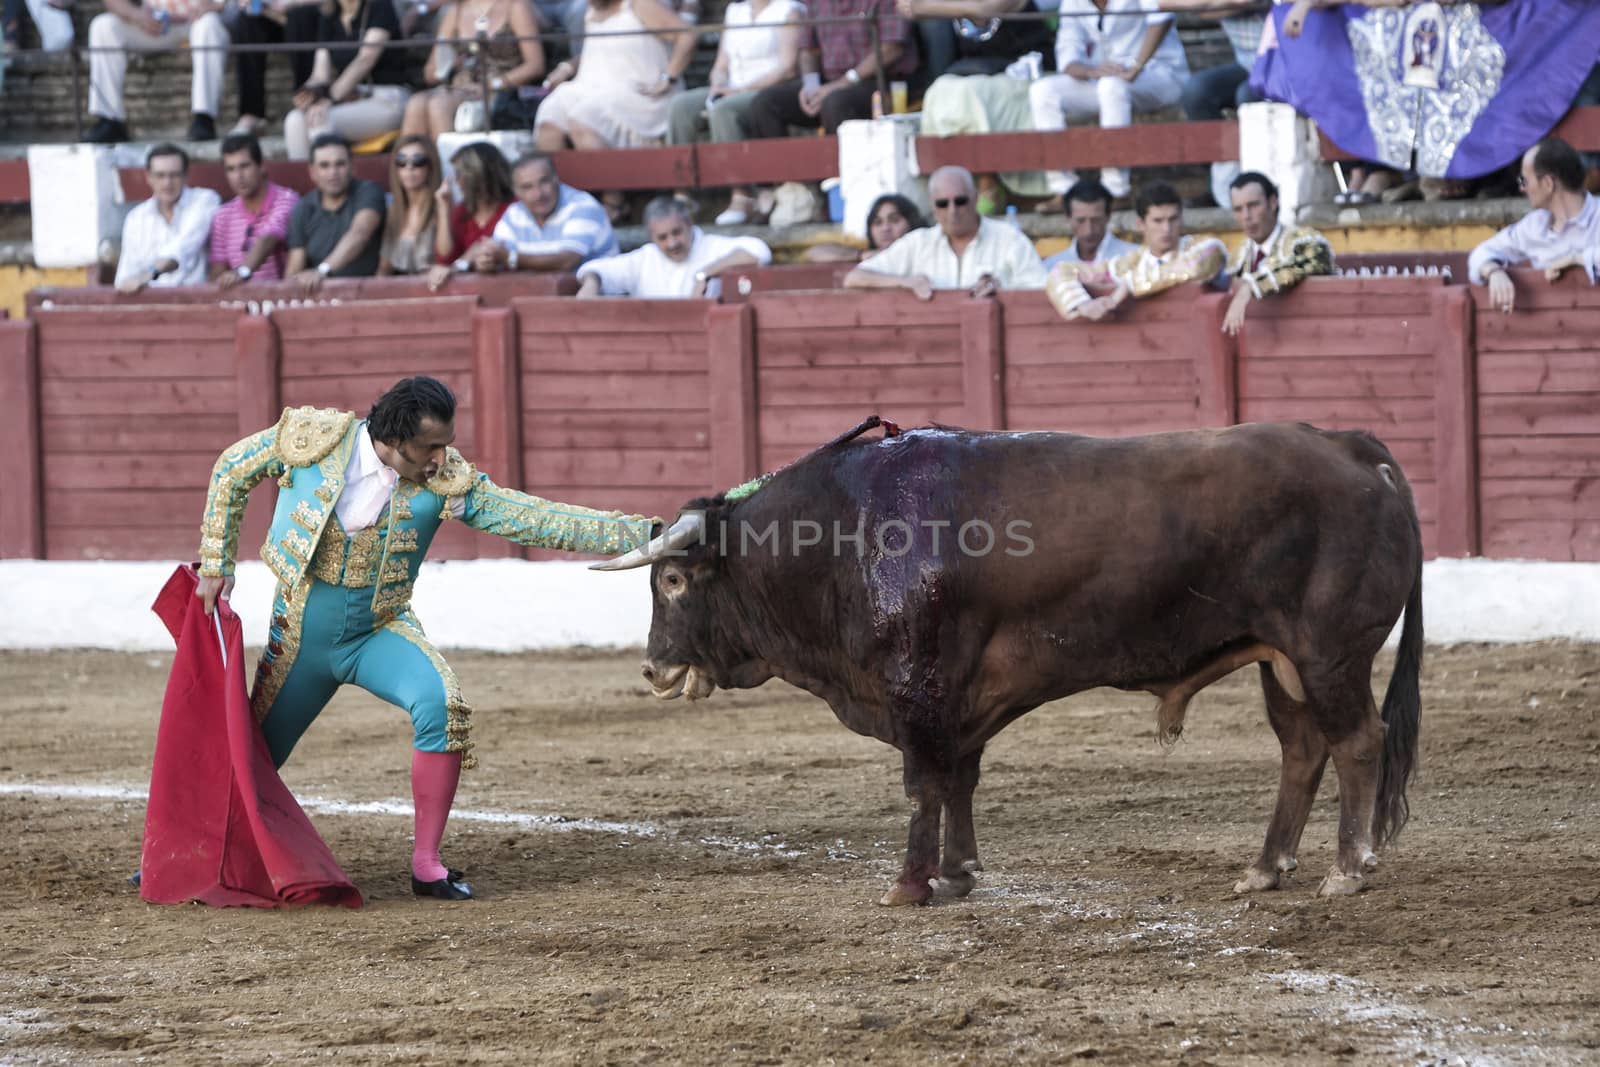 Andujar, Jaen province, SPAIN - 10 september 2011: Spainish bullfighter Juan de Felix stopped in front of the bull or also called desplante, offering to the public their courage in the Bullring of Andujar, Jaen province, Andalusia, Spain